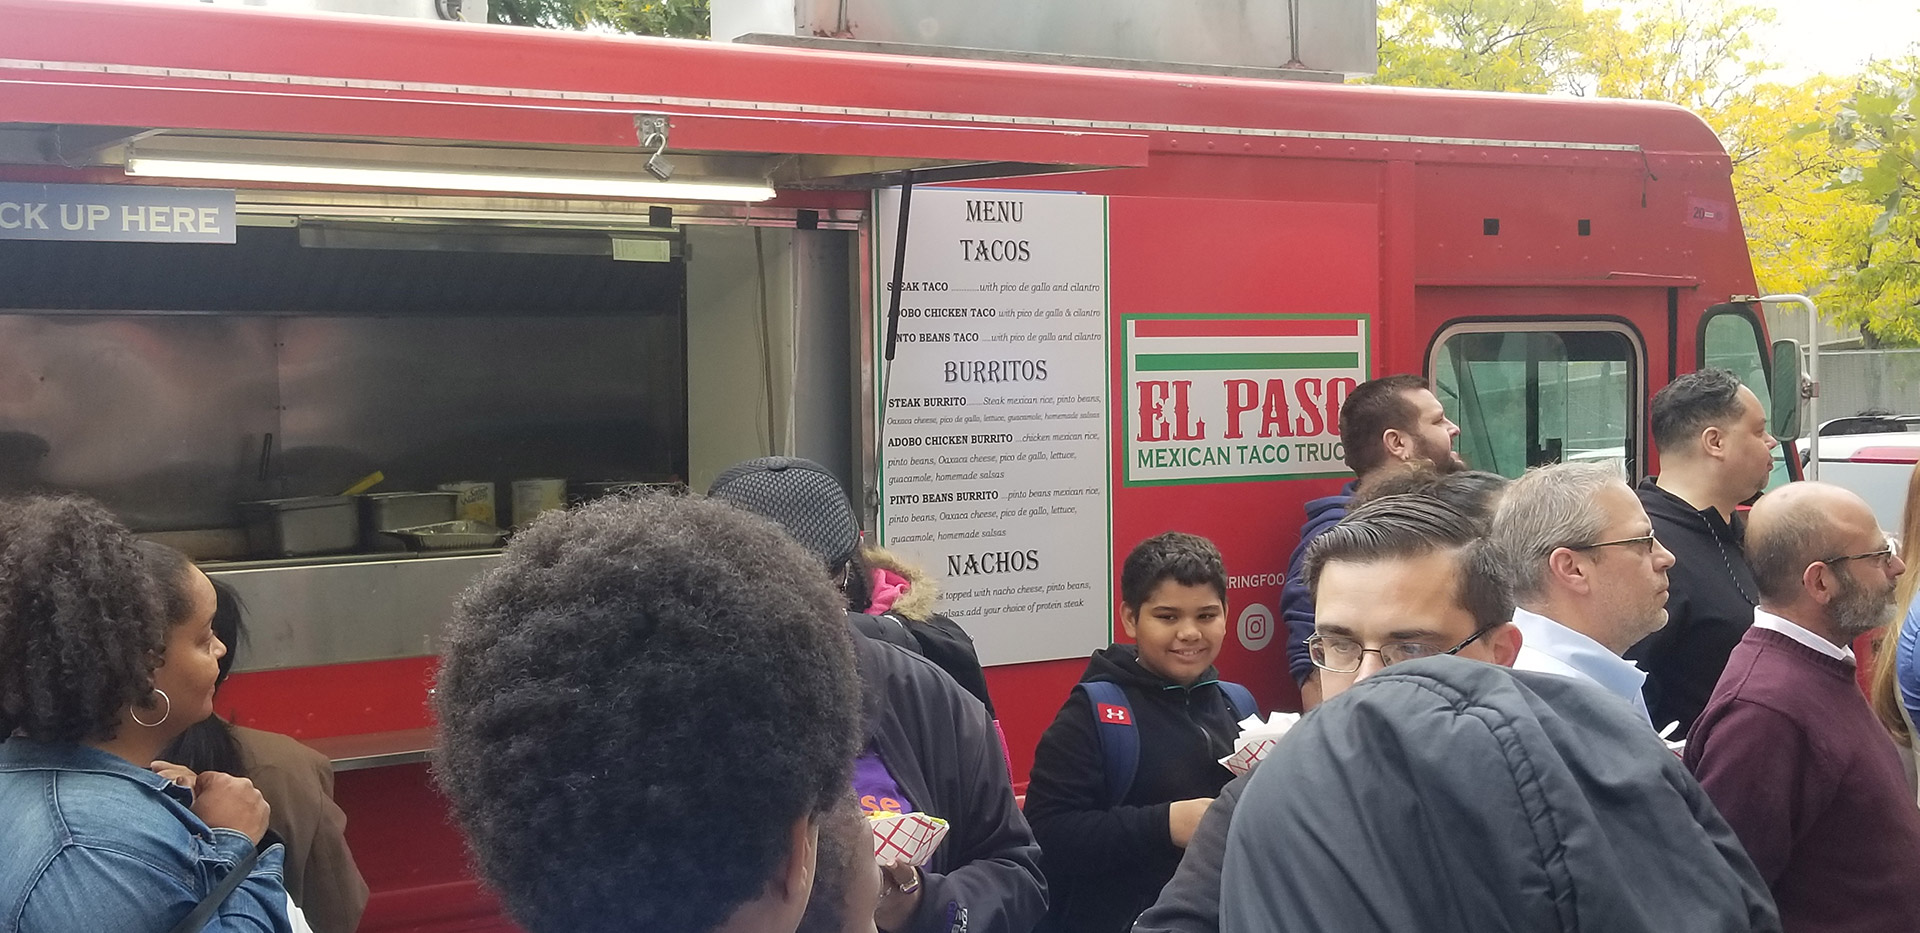 Taco Truck Catering Services